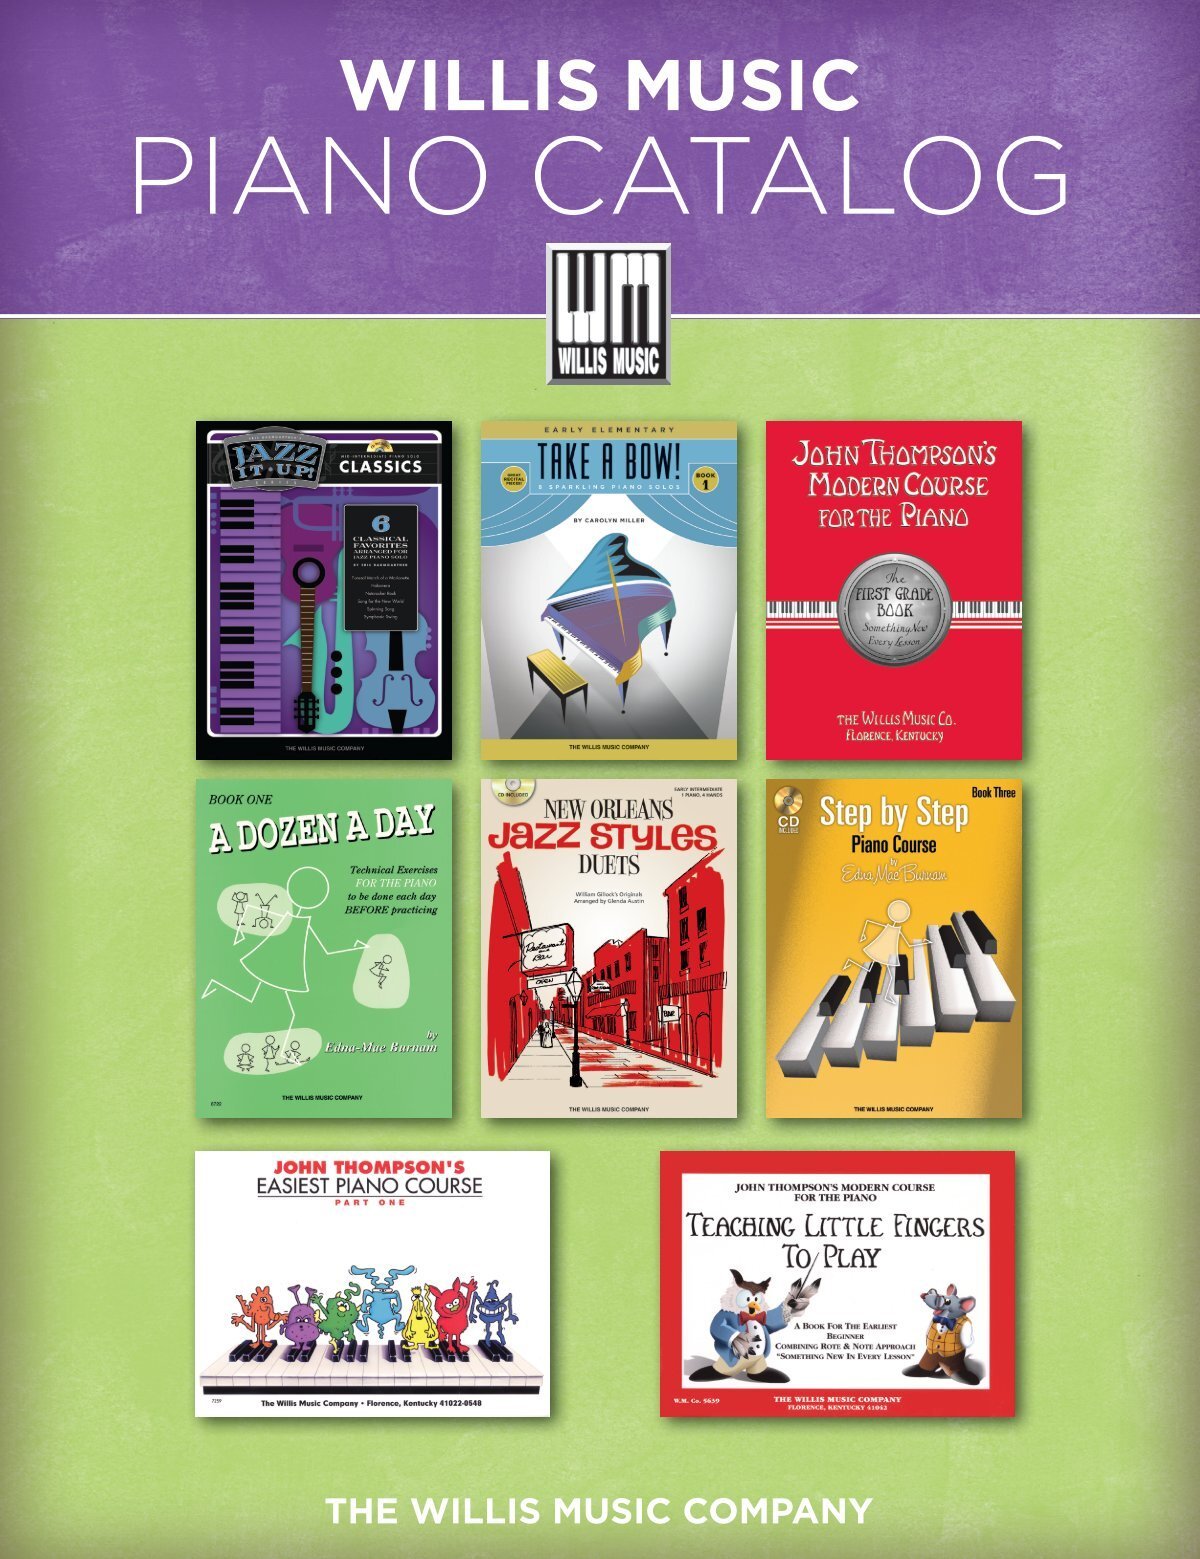 Fanfare For The Bells (for the right hand)" Sheet Music for Piano -  Sheet Music Now